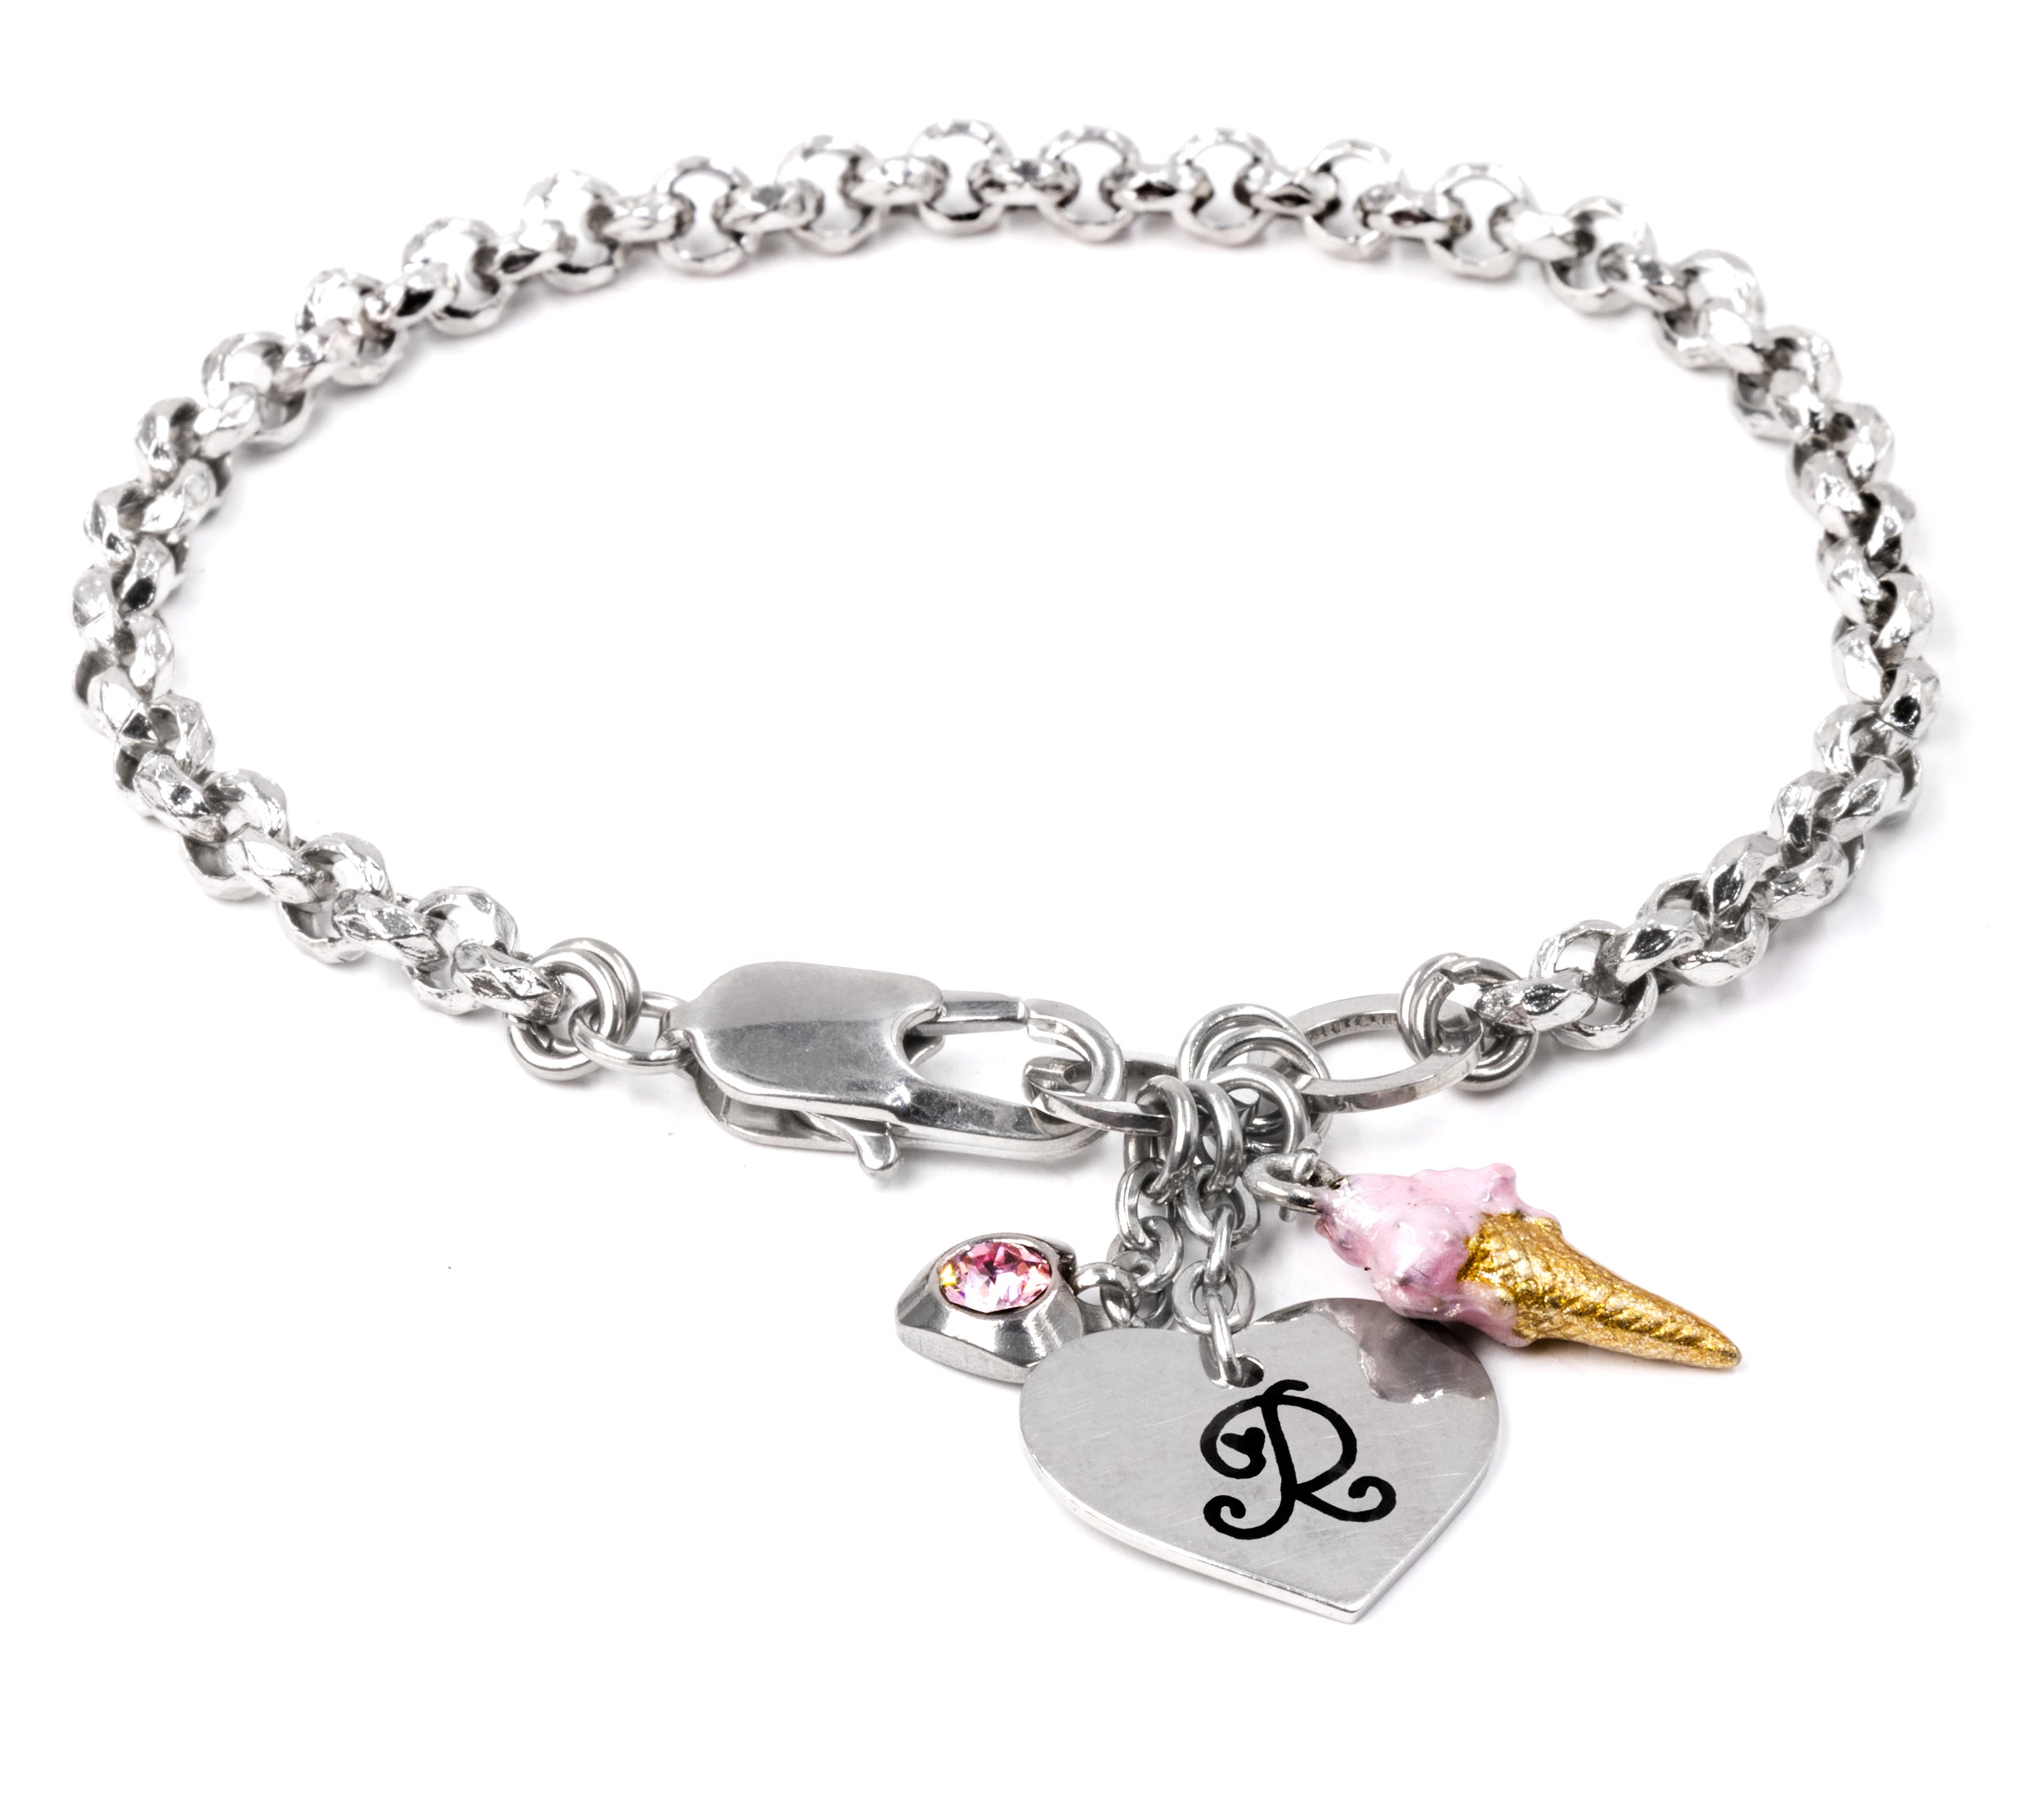 Engraved Ice Cream Bracelet with Personalized Initial